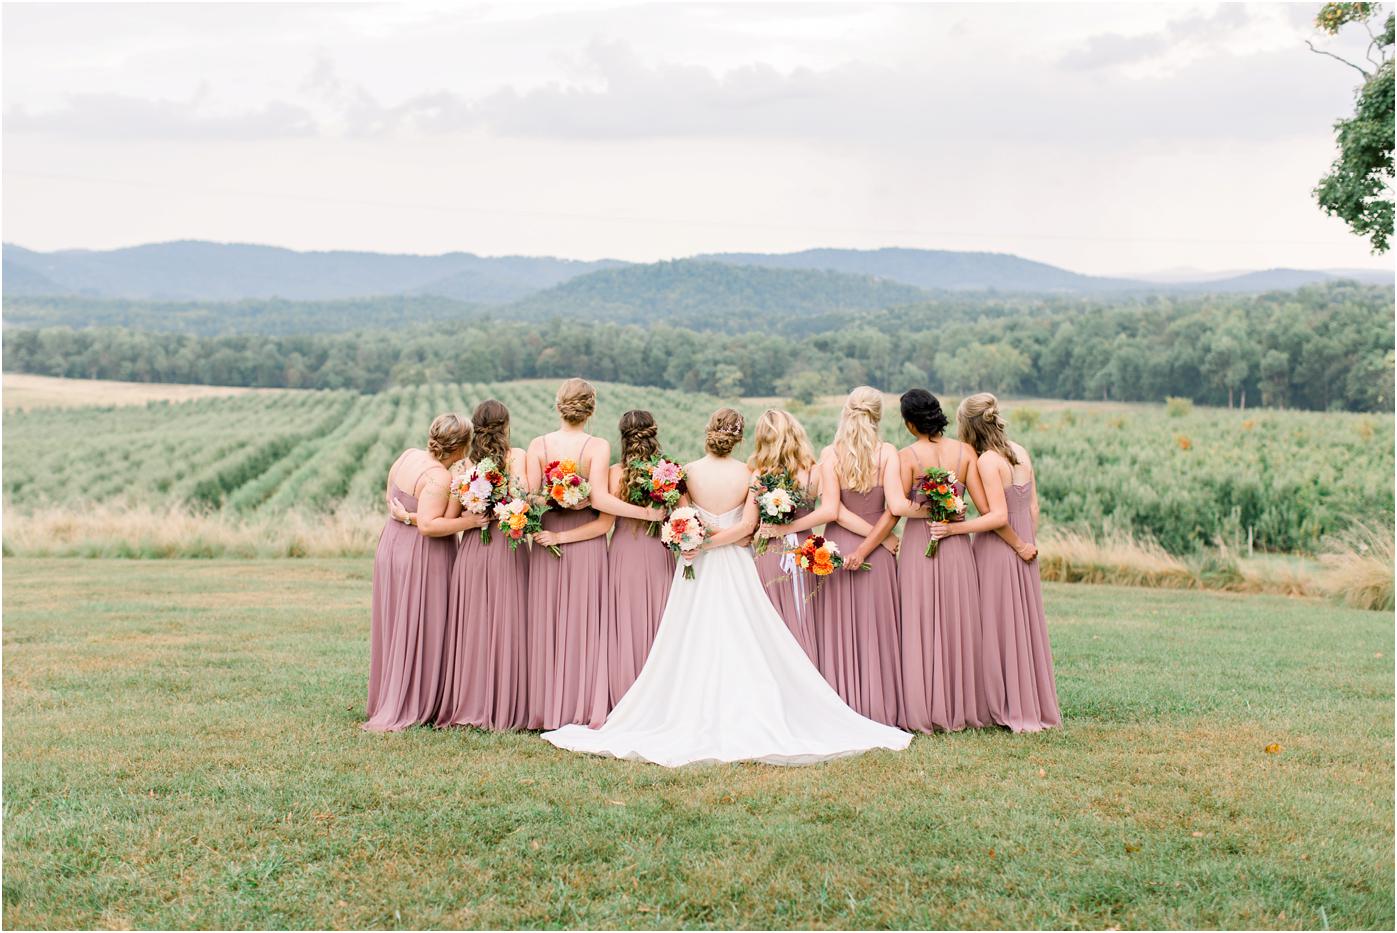 Bride and bridesmaids looking at the mountains and vineyards backdrop at Pharsalia. Bridesmaids in mauve bridesmaid dresses with fall colored bouquets